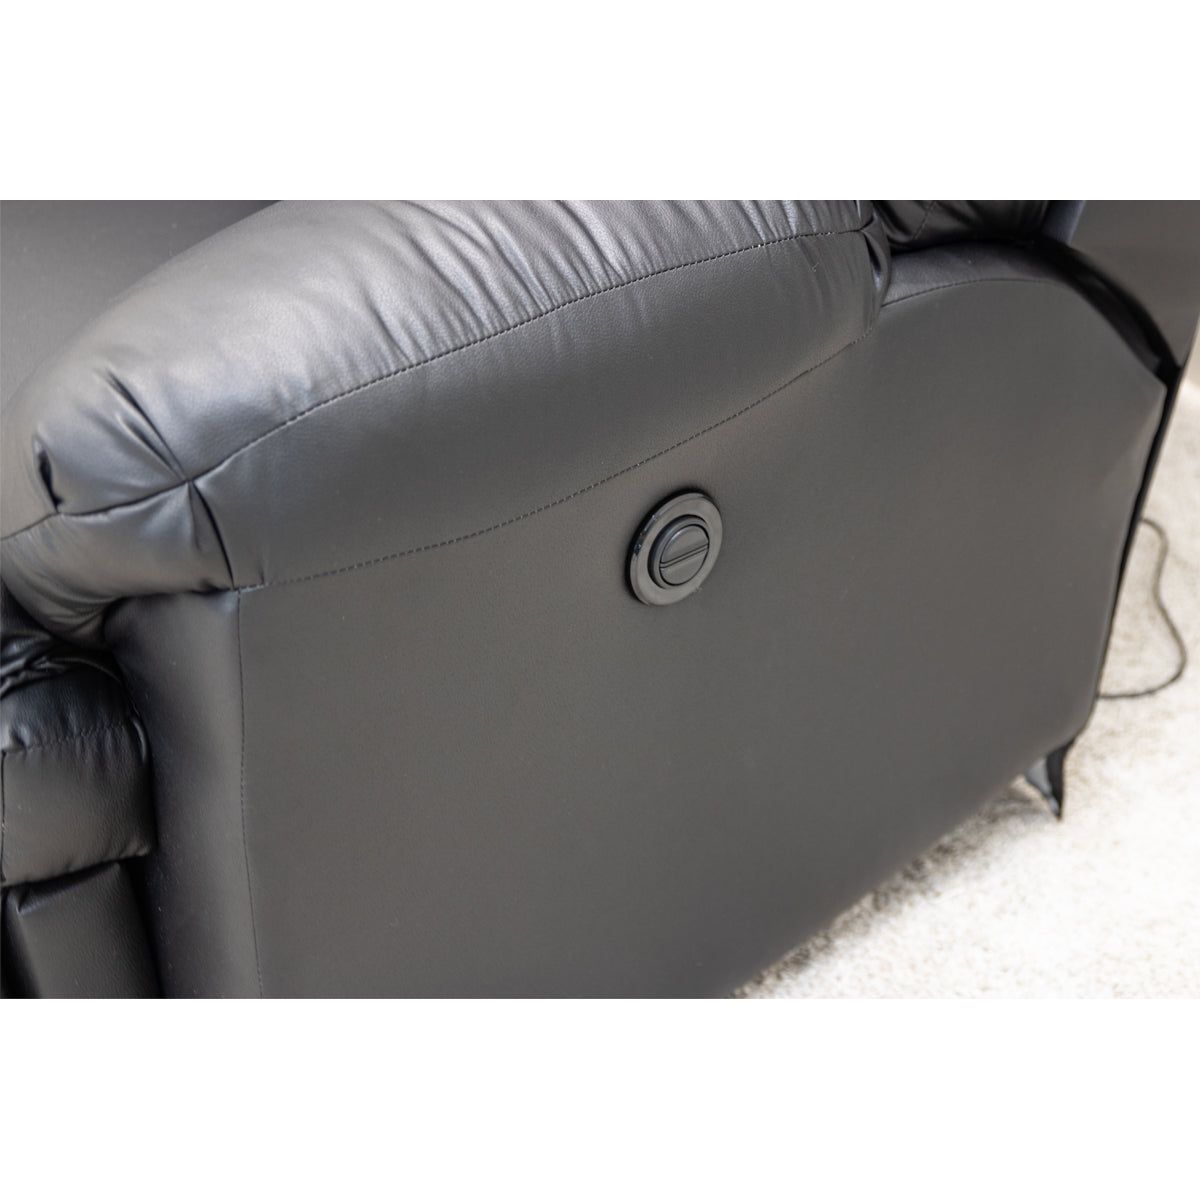 Montana Reclining Loveseat with Console